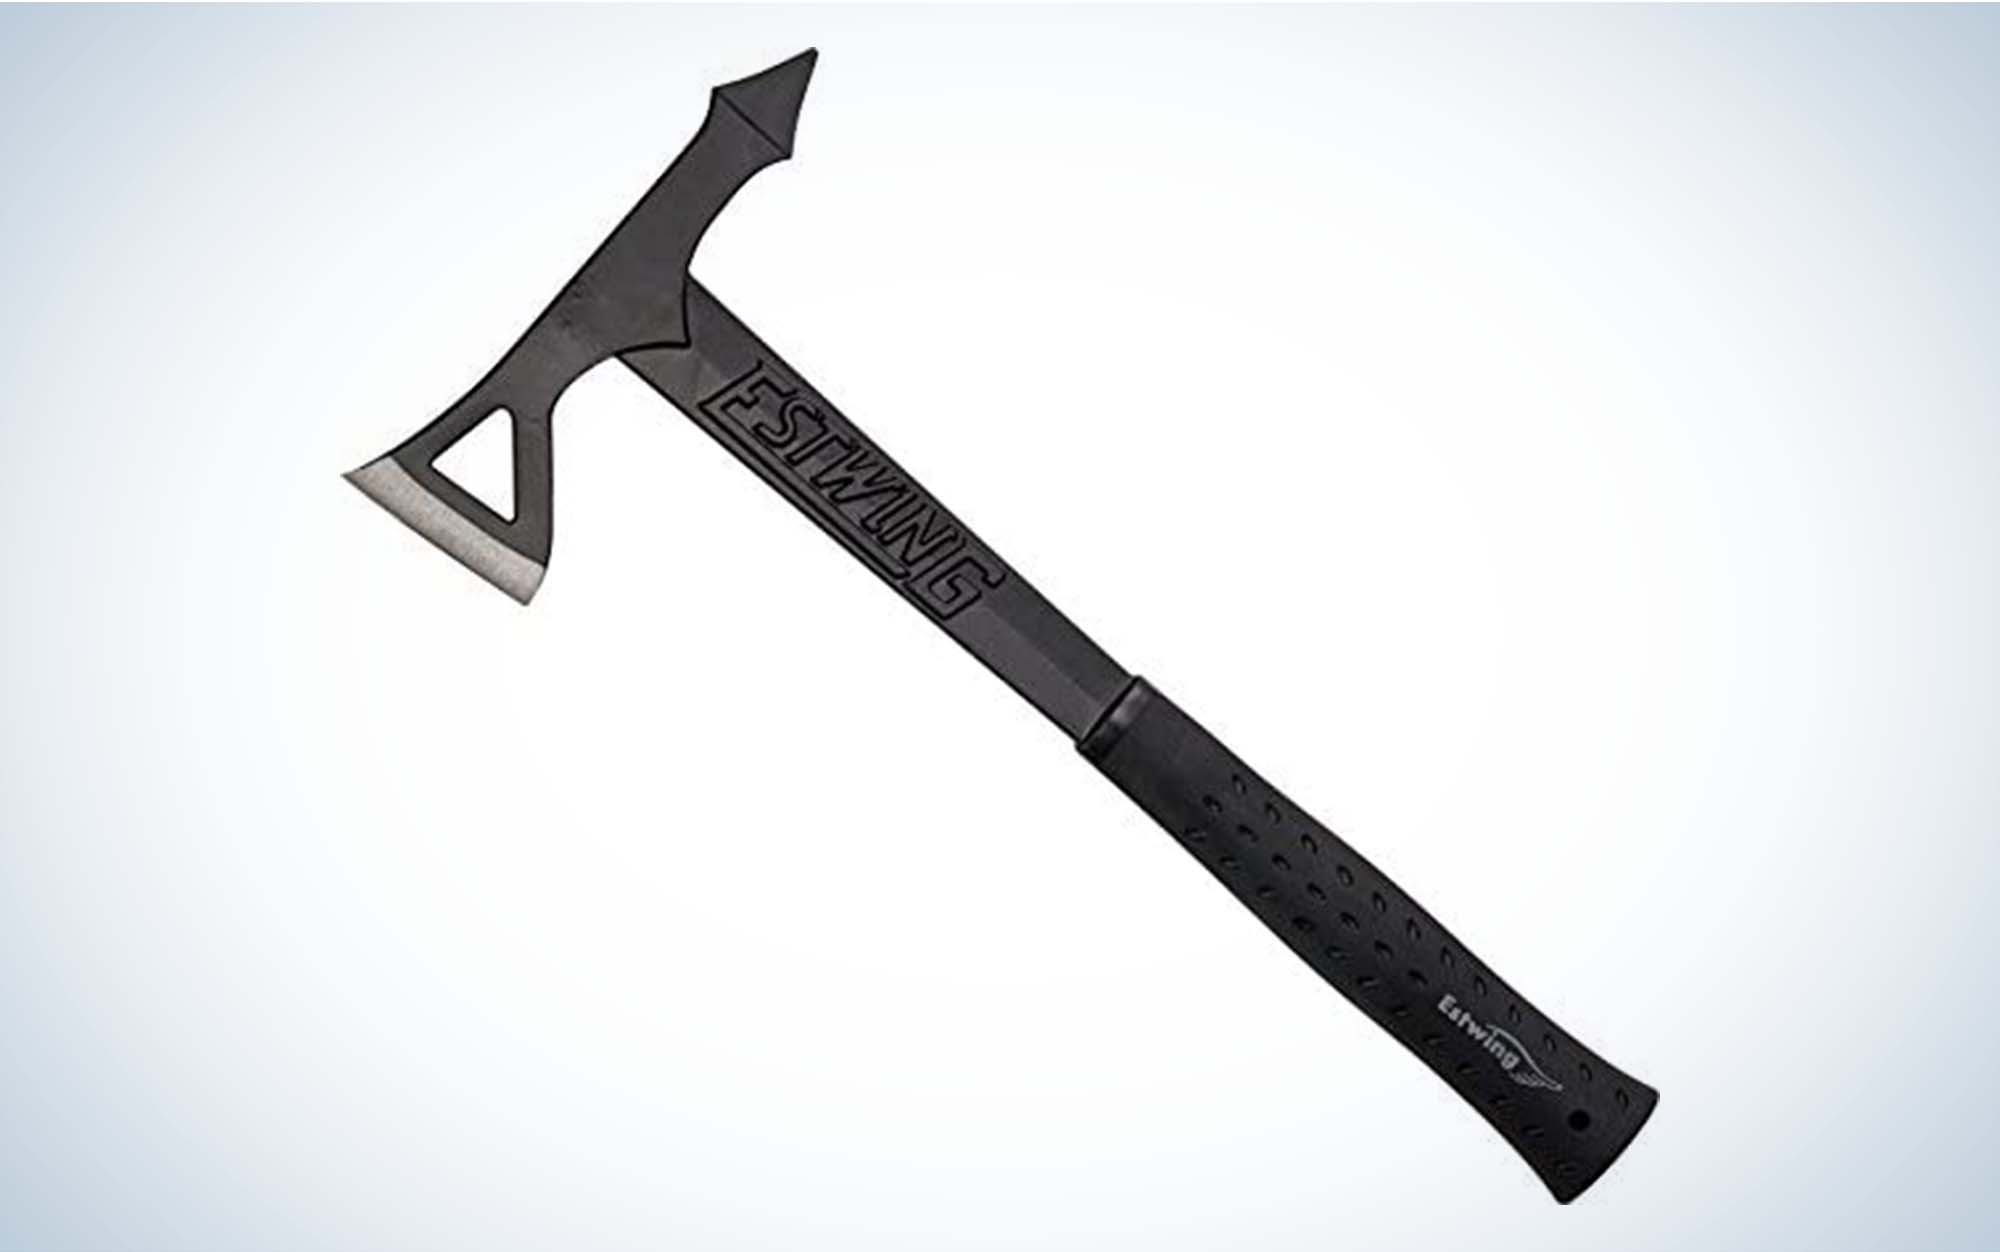 The Estwing Black Eagle is the best tomahawk for hard use.